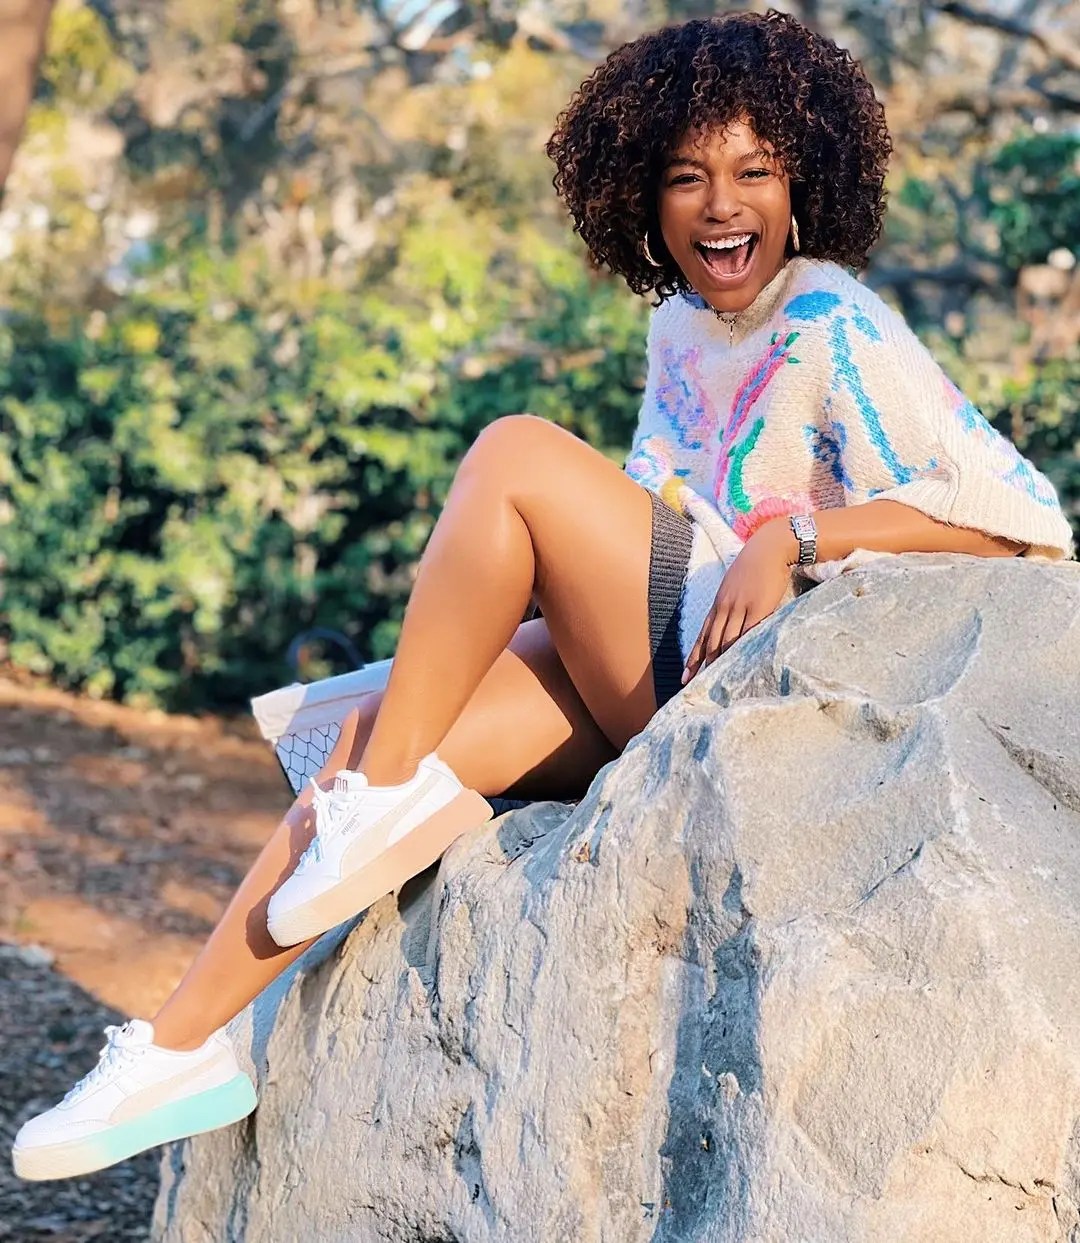 Nomzamo Mbatha hangs out with American TV host Oprah on thanksgiving – Video